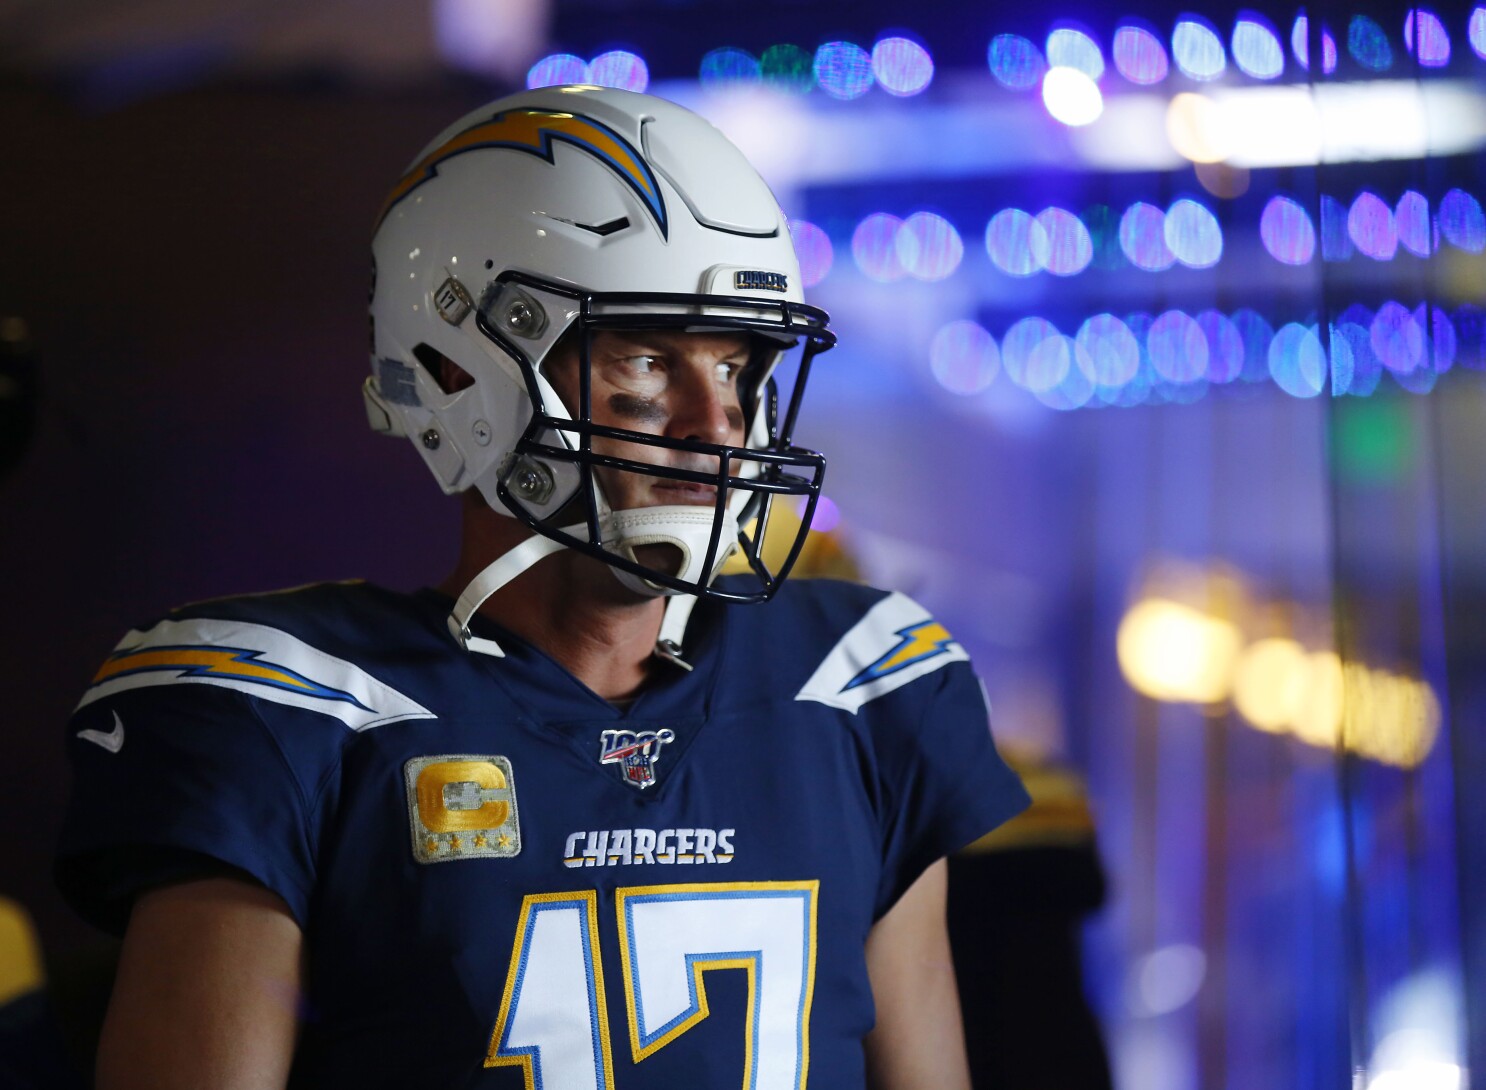 Philip Rivers and Chargers agree to part ways - Los Angeles Times